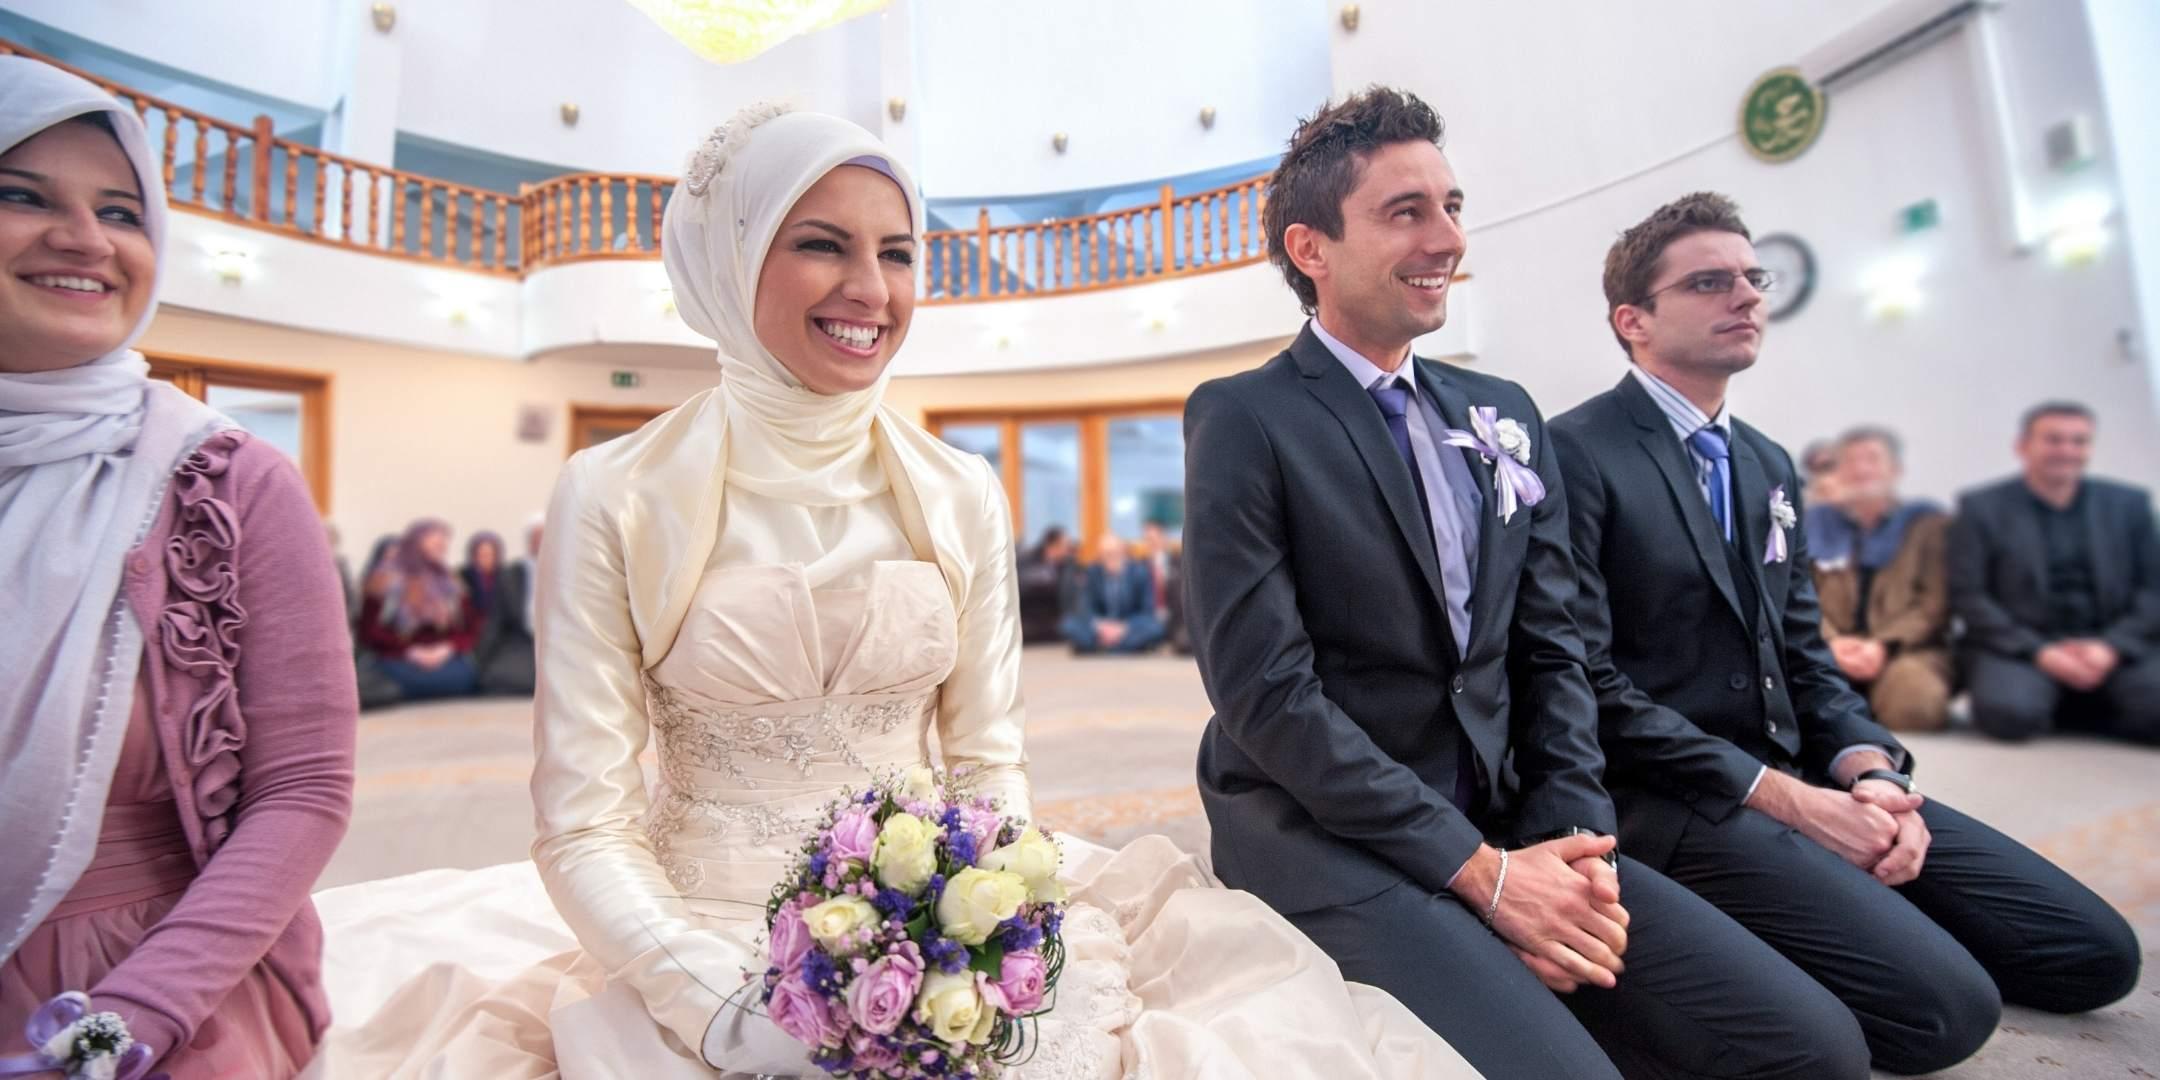 Smiling islamic bride and groom marrying at a mosque